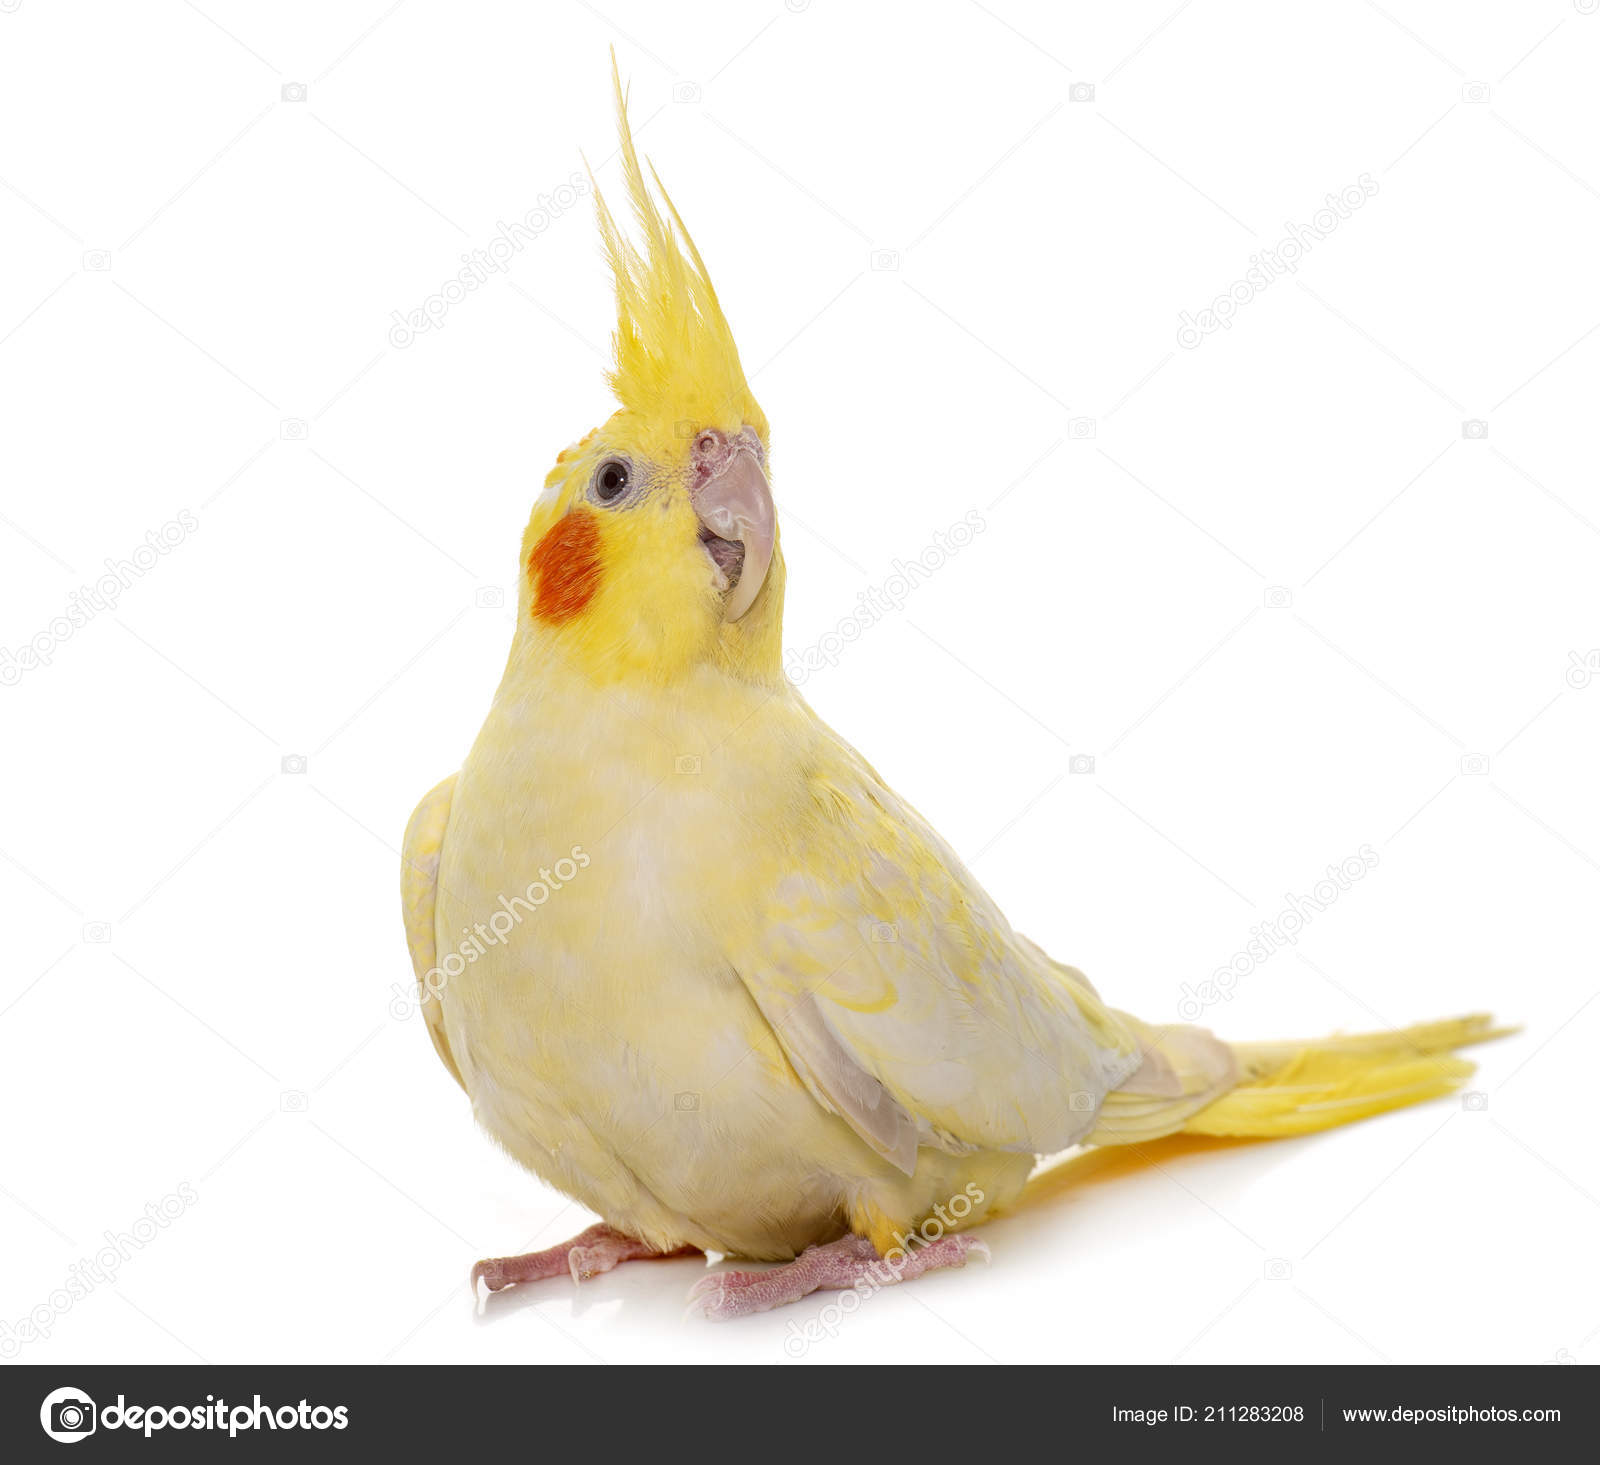 Adult Cockatiel Front White Background Stock Photo C Cynoclub 211283208,Italian Beans And Greens